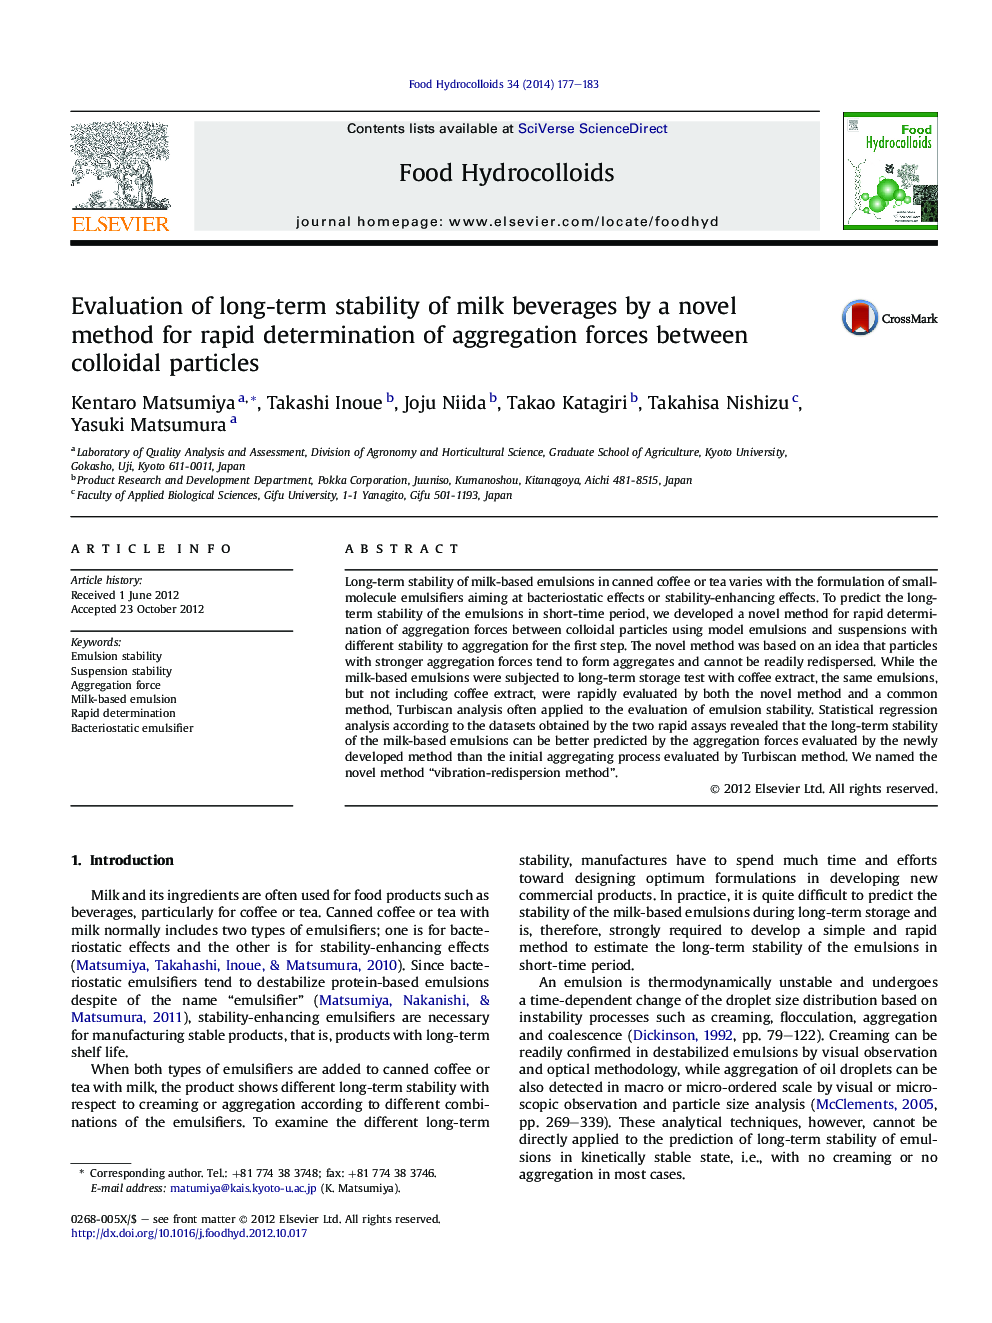 Evaluation of long-term stability of milk beverages by a novel method for rapid determination of aggregation forces between colloidal particles